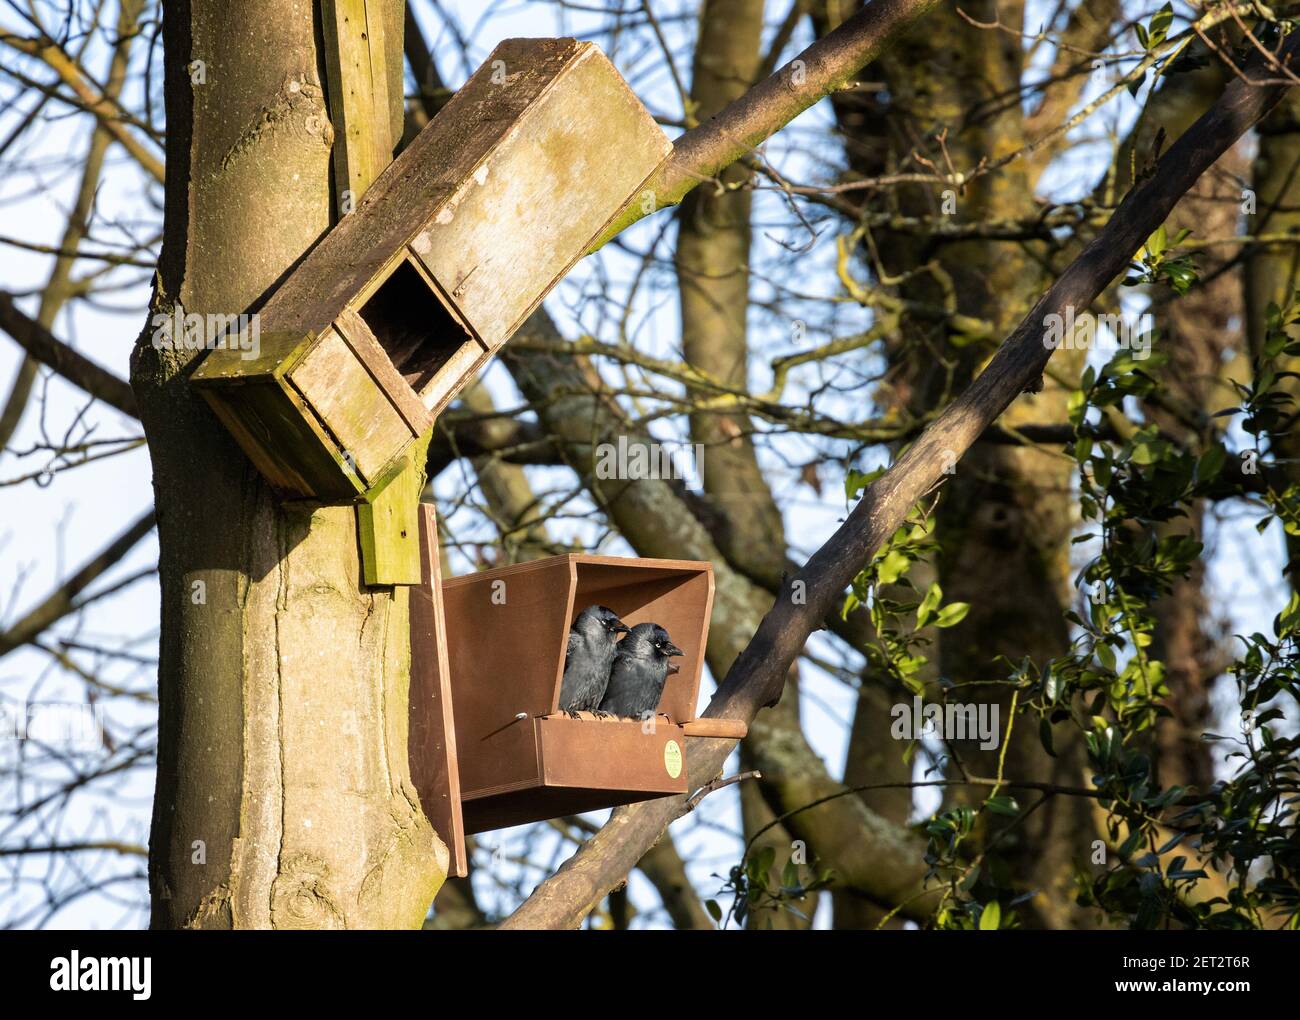 UK wildlife: Signs of spring - Two jackdaws (Corvus monedula) sitting in a new kestrel nestbox looking like they've chosen their nesting site, West Yo Stock Photo